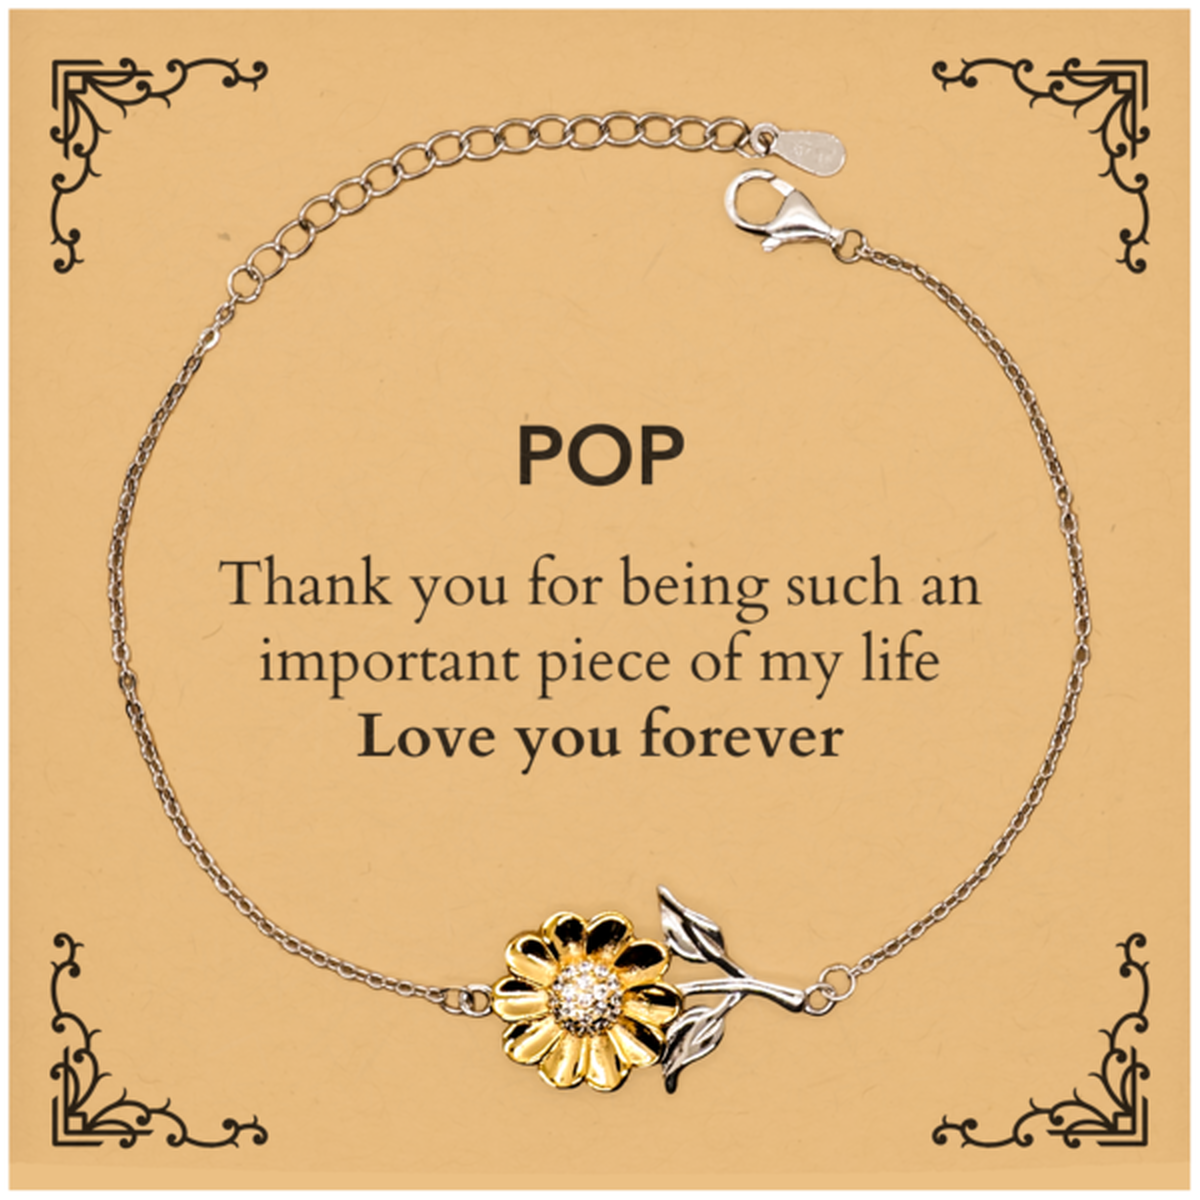 Appropriate Pop Sunflower Bracelet Epic Birthday Gifts for Pop Thank you for being such an important piece of my life Pop Christmas Mothers Fathers Day